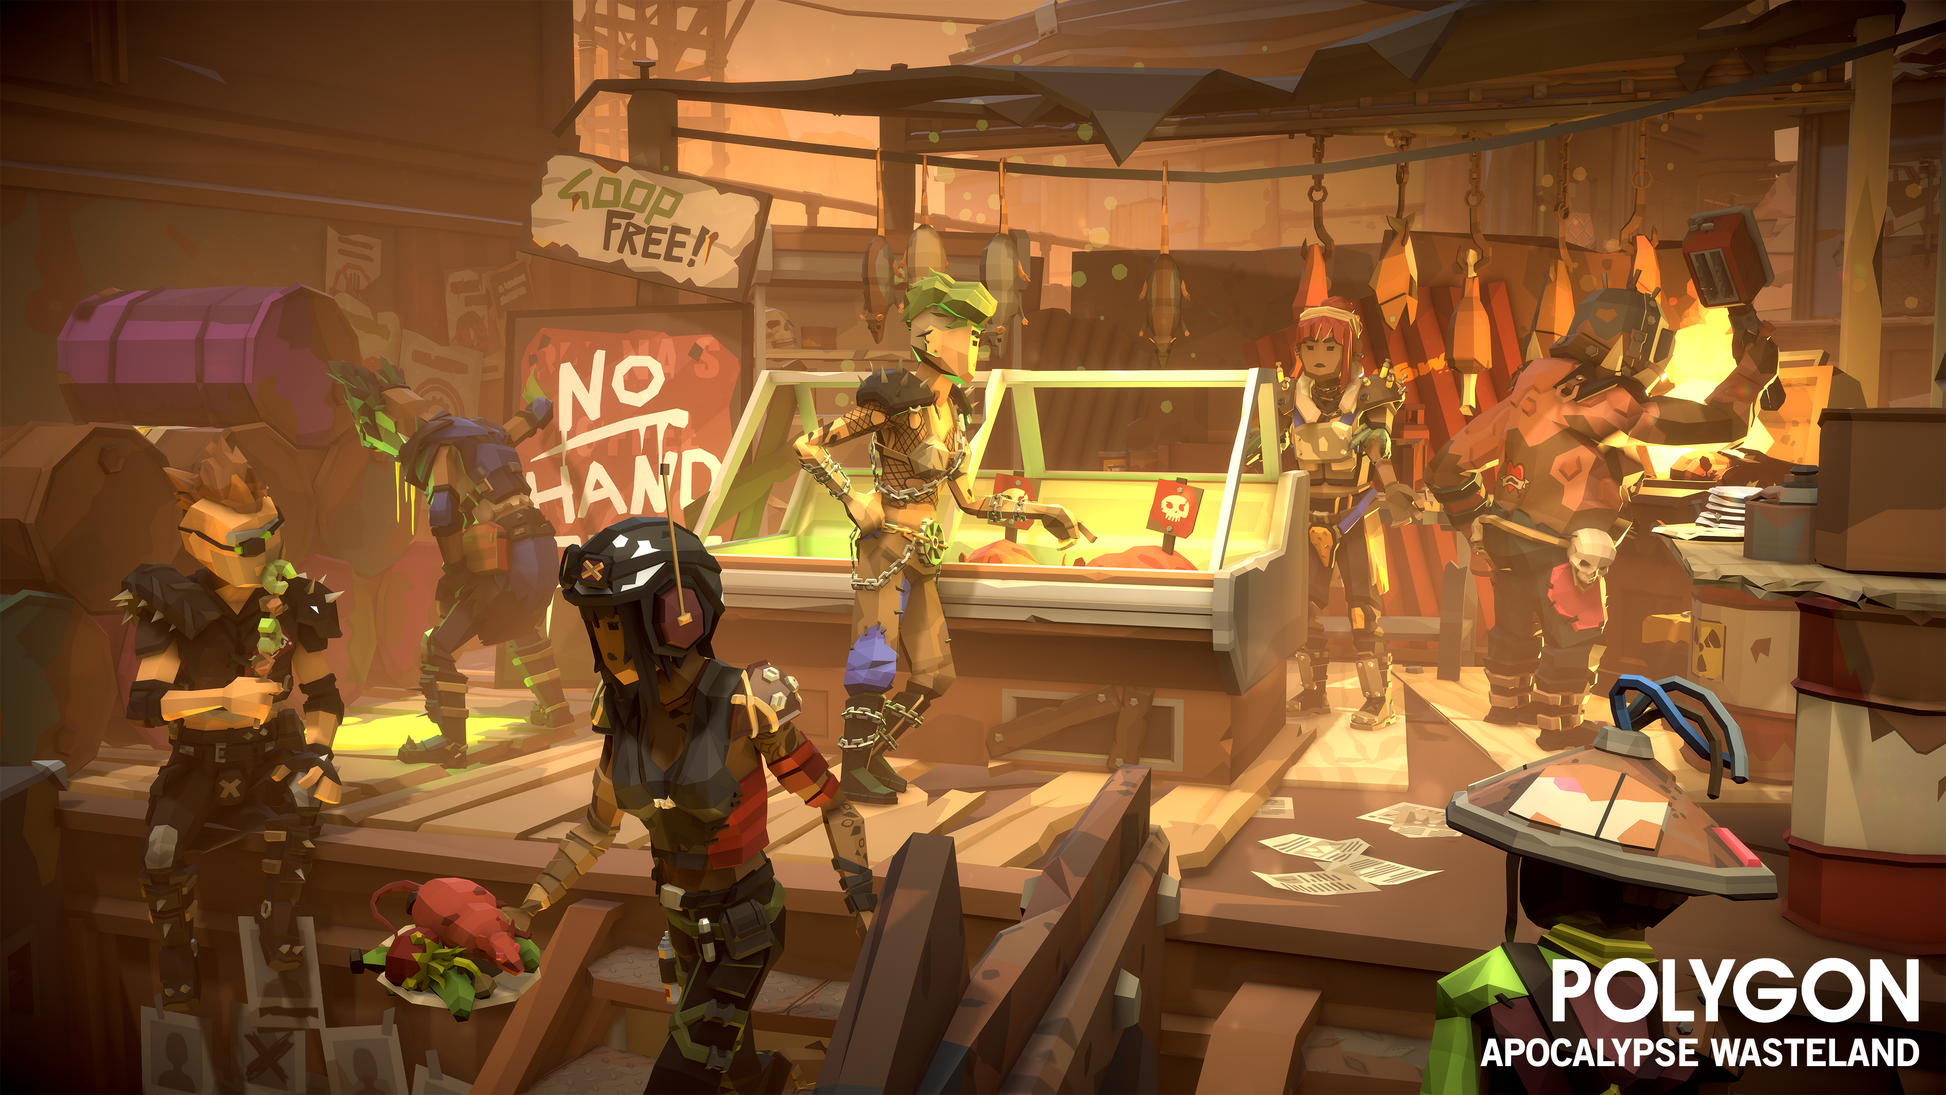 Villagers shopping for food in a wasteland market